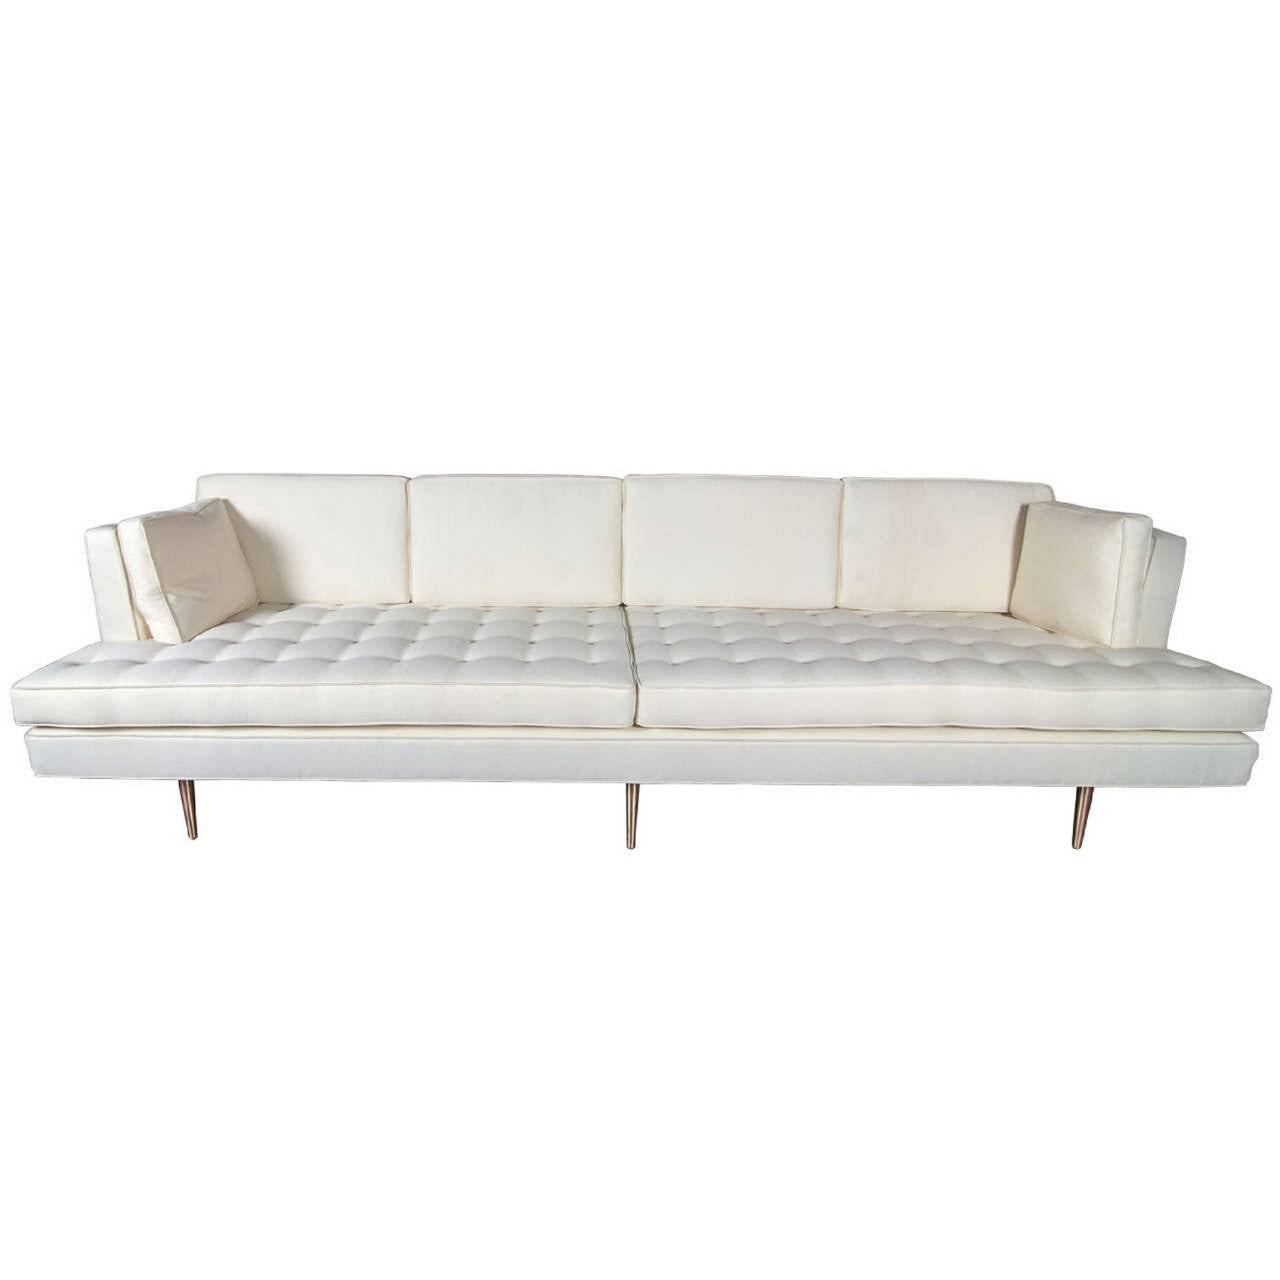 Long, low upholstered sofa with tufted seat, and bronze legs. Designed by Edward Wormley for Dunbar, 1950s. Length 110 in, depth 34 in, back height 28 in, seat height 17 3/4 in.

WINTER SALE - 40% OFF - One Week Only !!

(Price shown is reduced